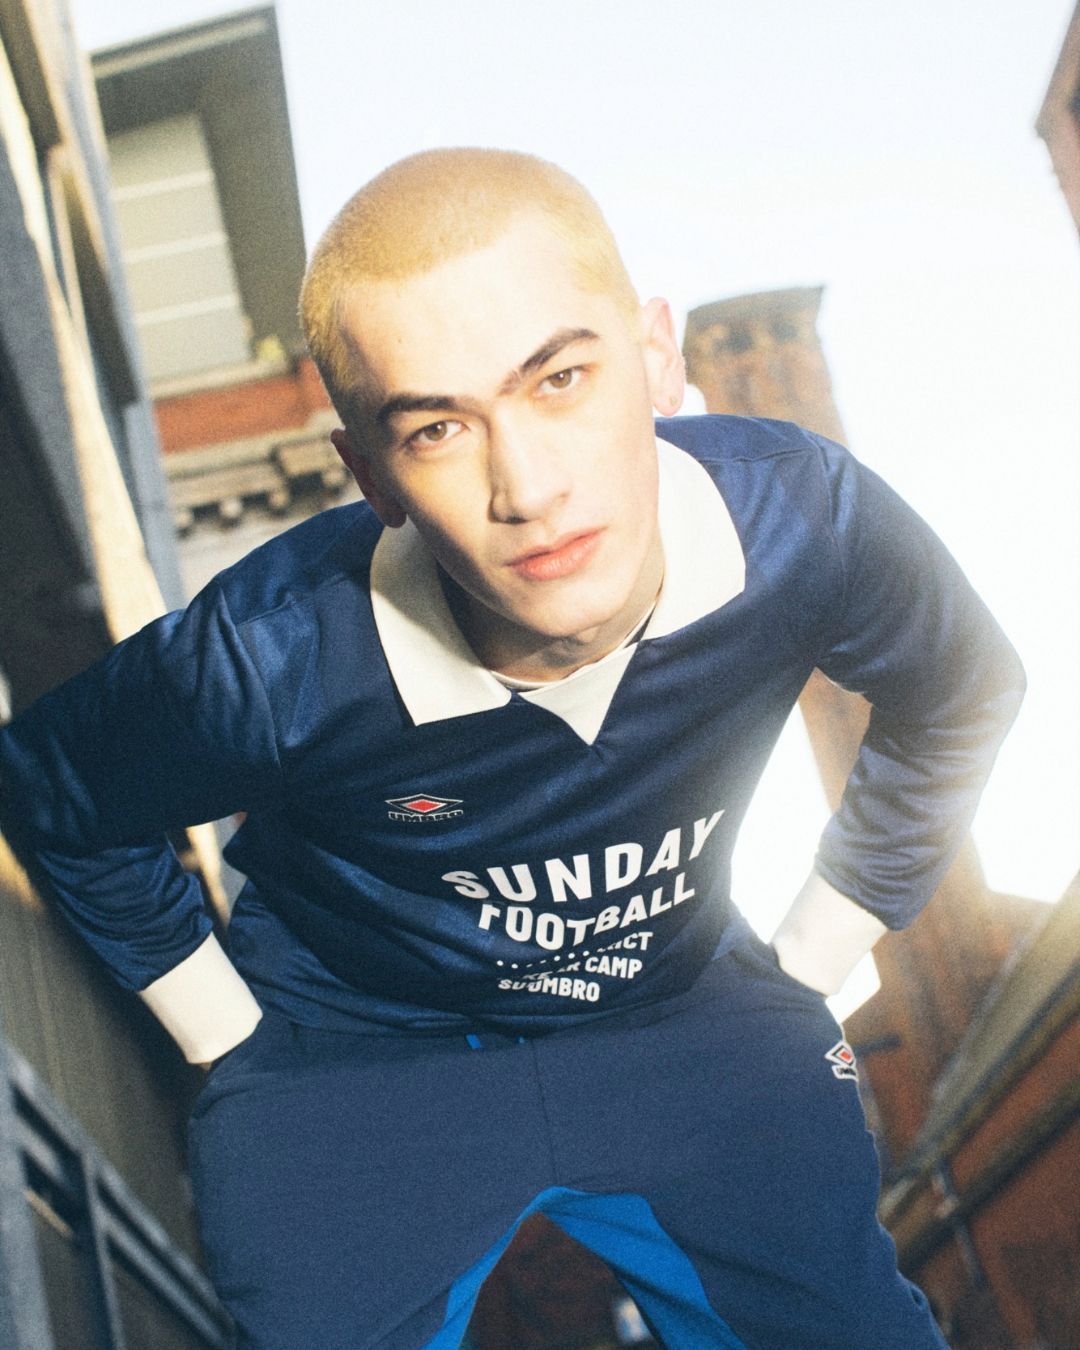 100 years of Umbro told in a single collection The brand that paved the way for the dialogue between clothing and football